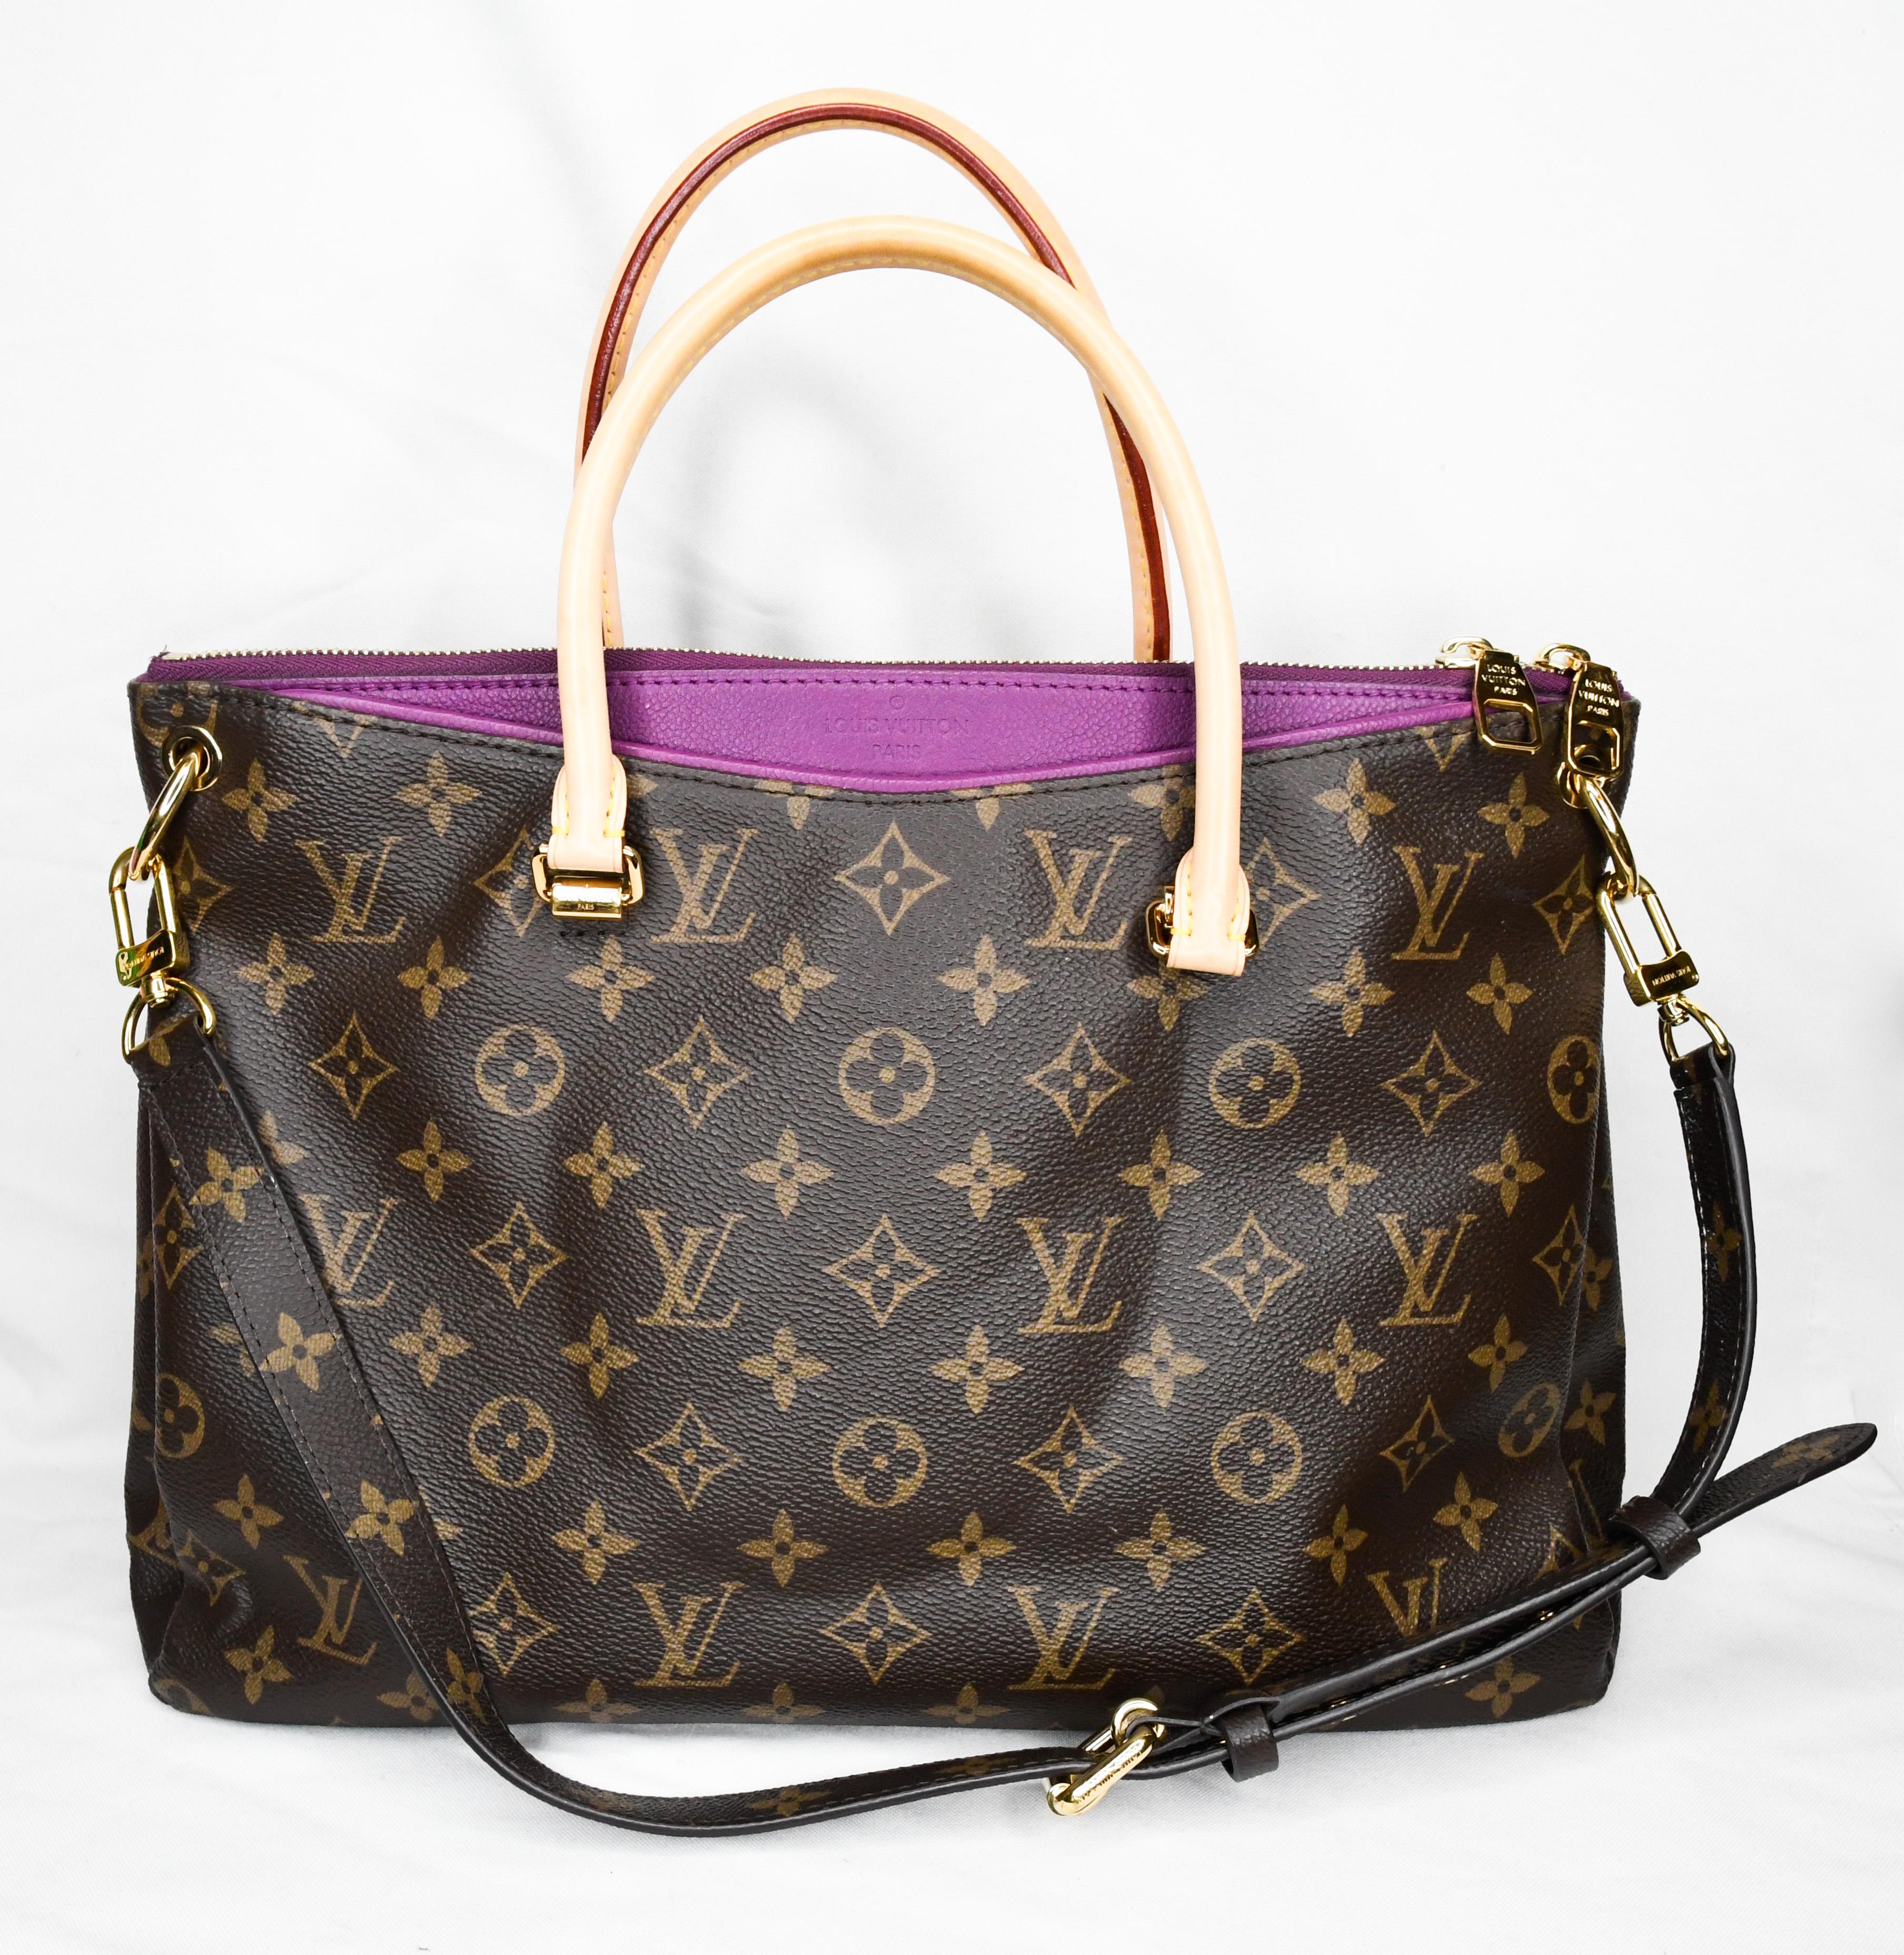 The exterior of this stunning Louis Vuitton features the house's iconic monogram canvas.  The accent of amethyst purple and gold tone hardware is so today!  Great pop of color!  No shortage of space for everything with roomy interior and two